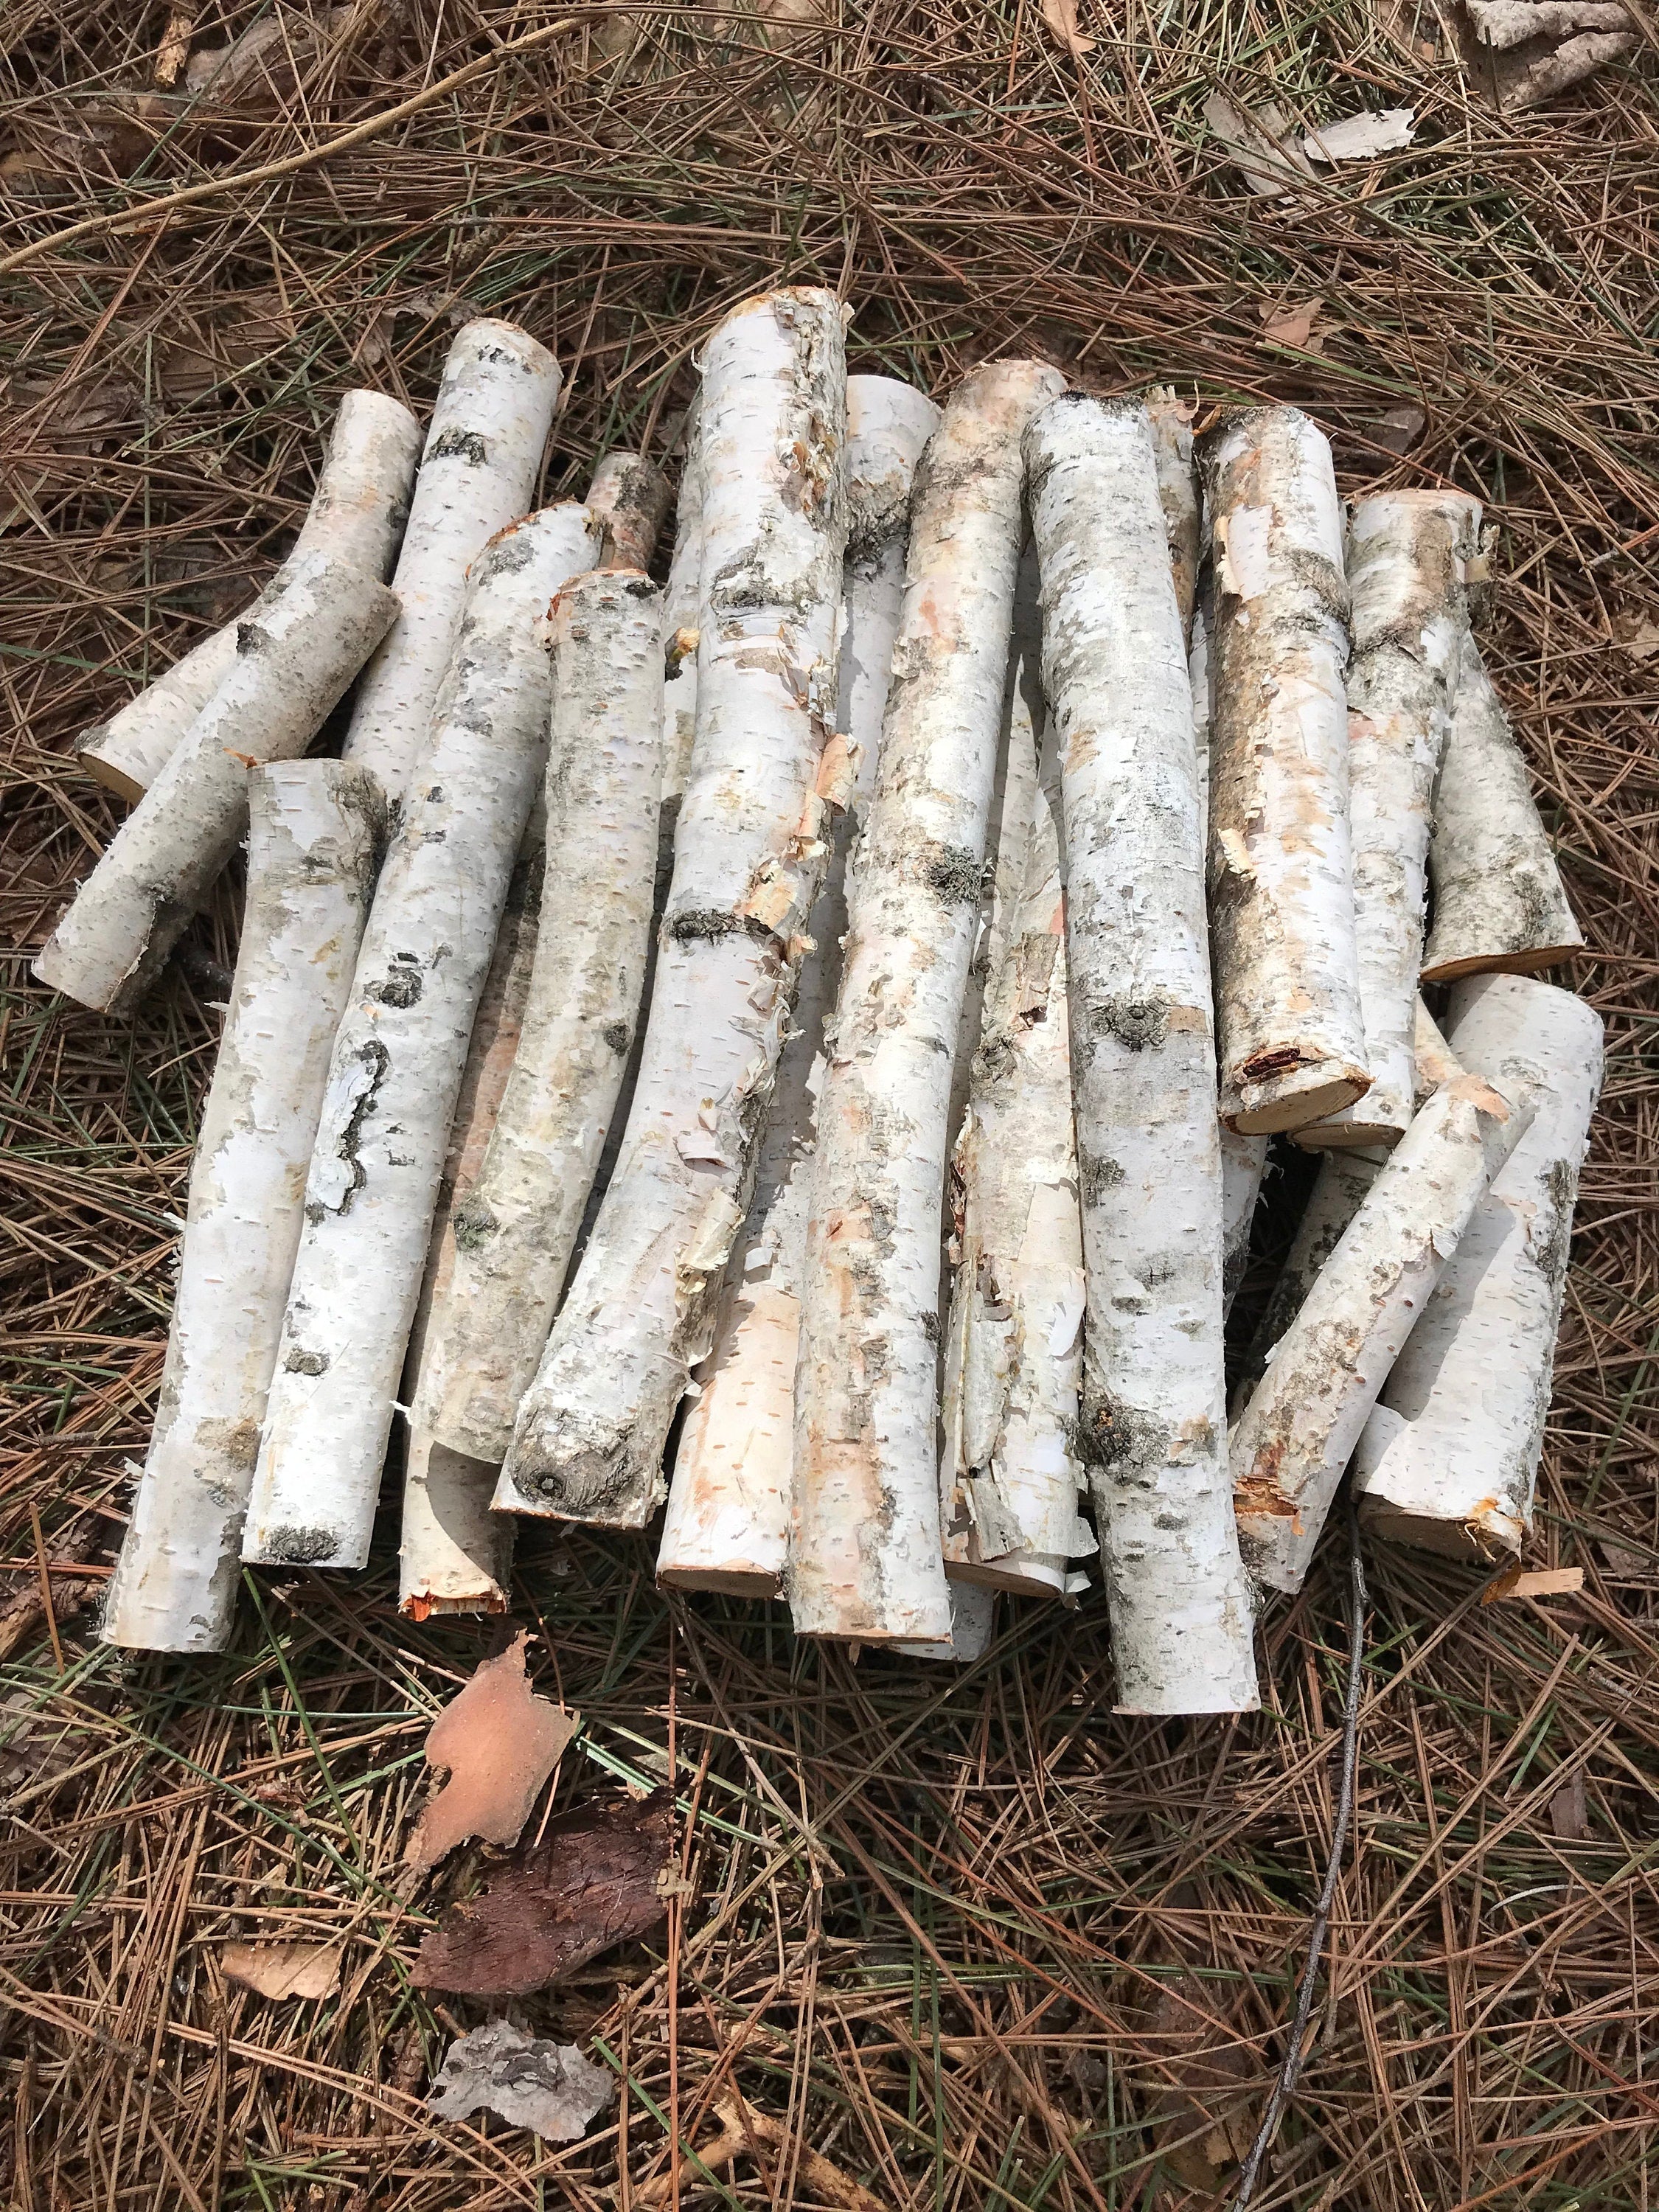 White Birch Branches, 21 assorted pieces varying is length from 2 inches to about 10, with diameters from 1/4- 2 inches